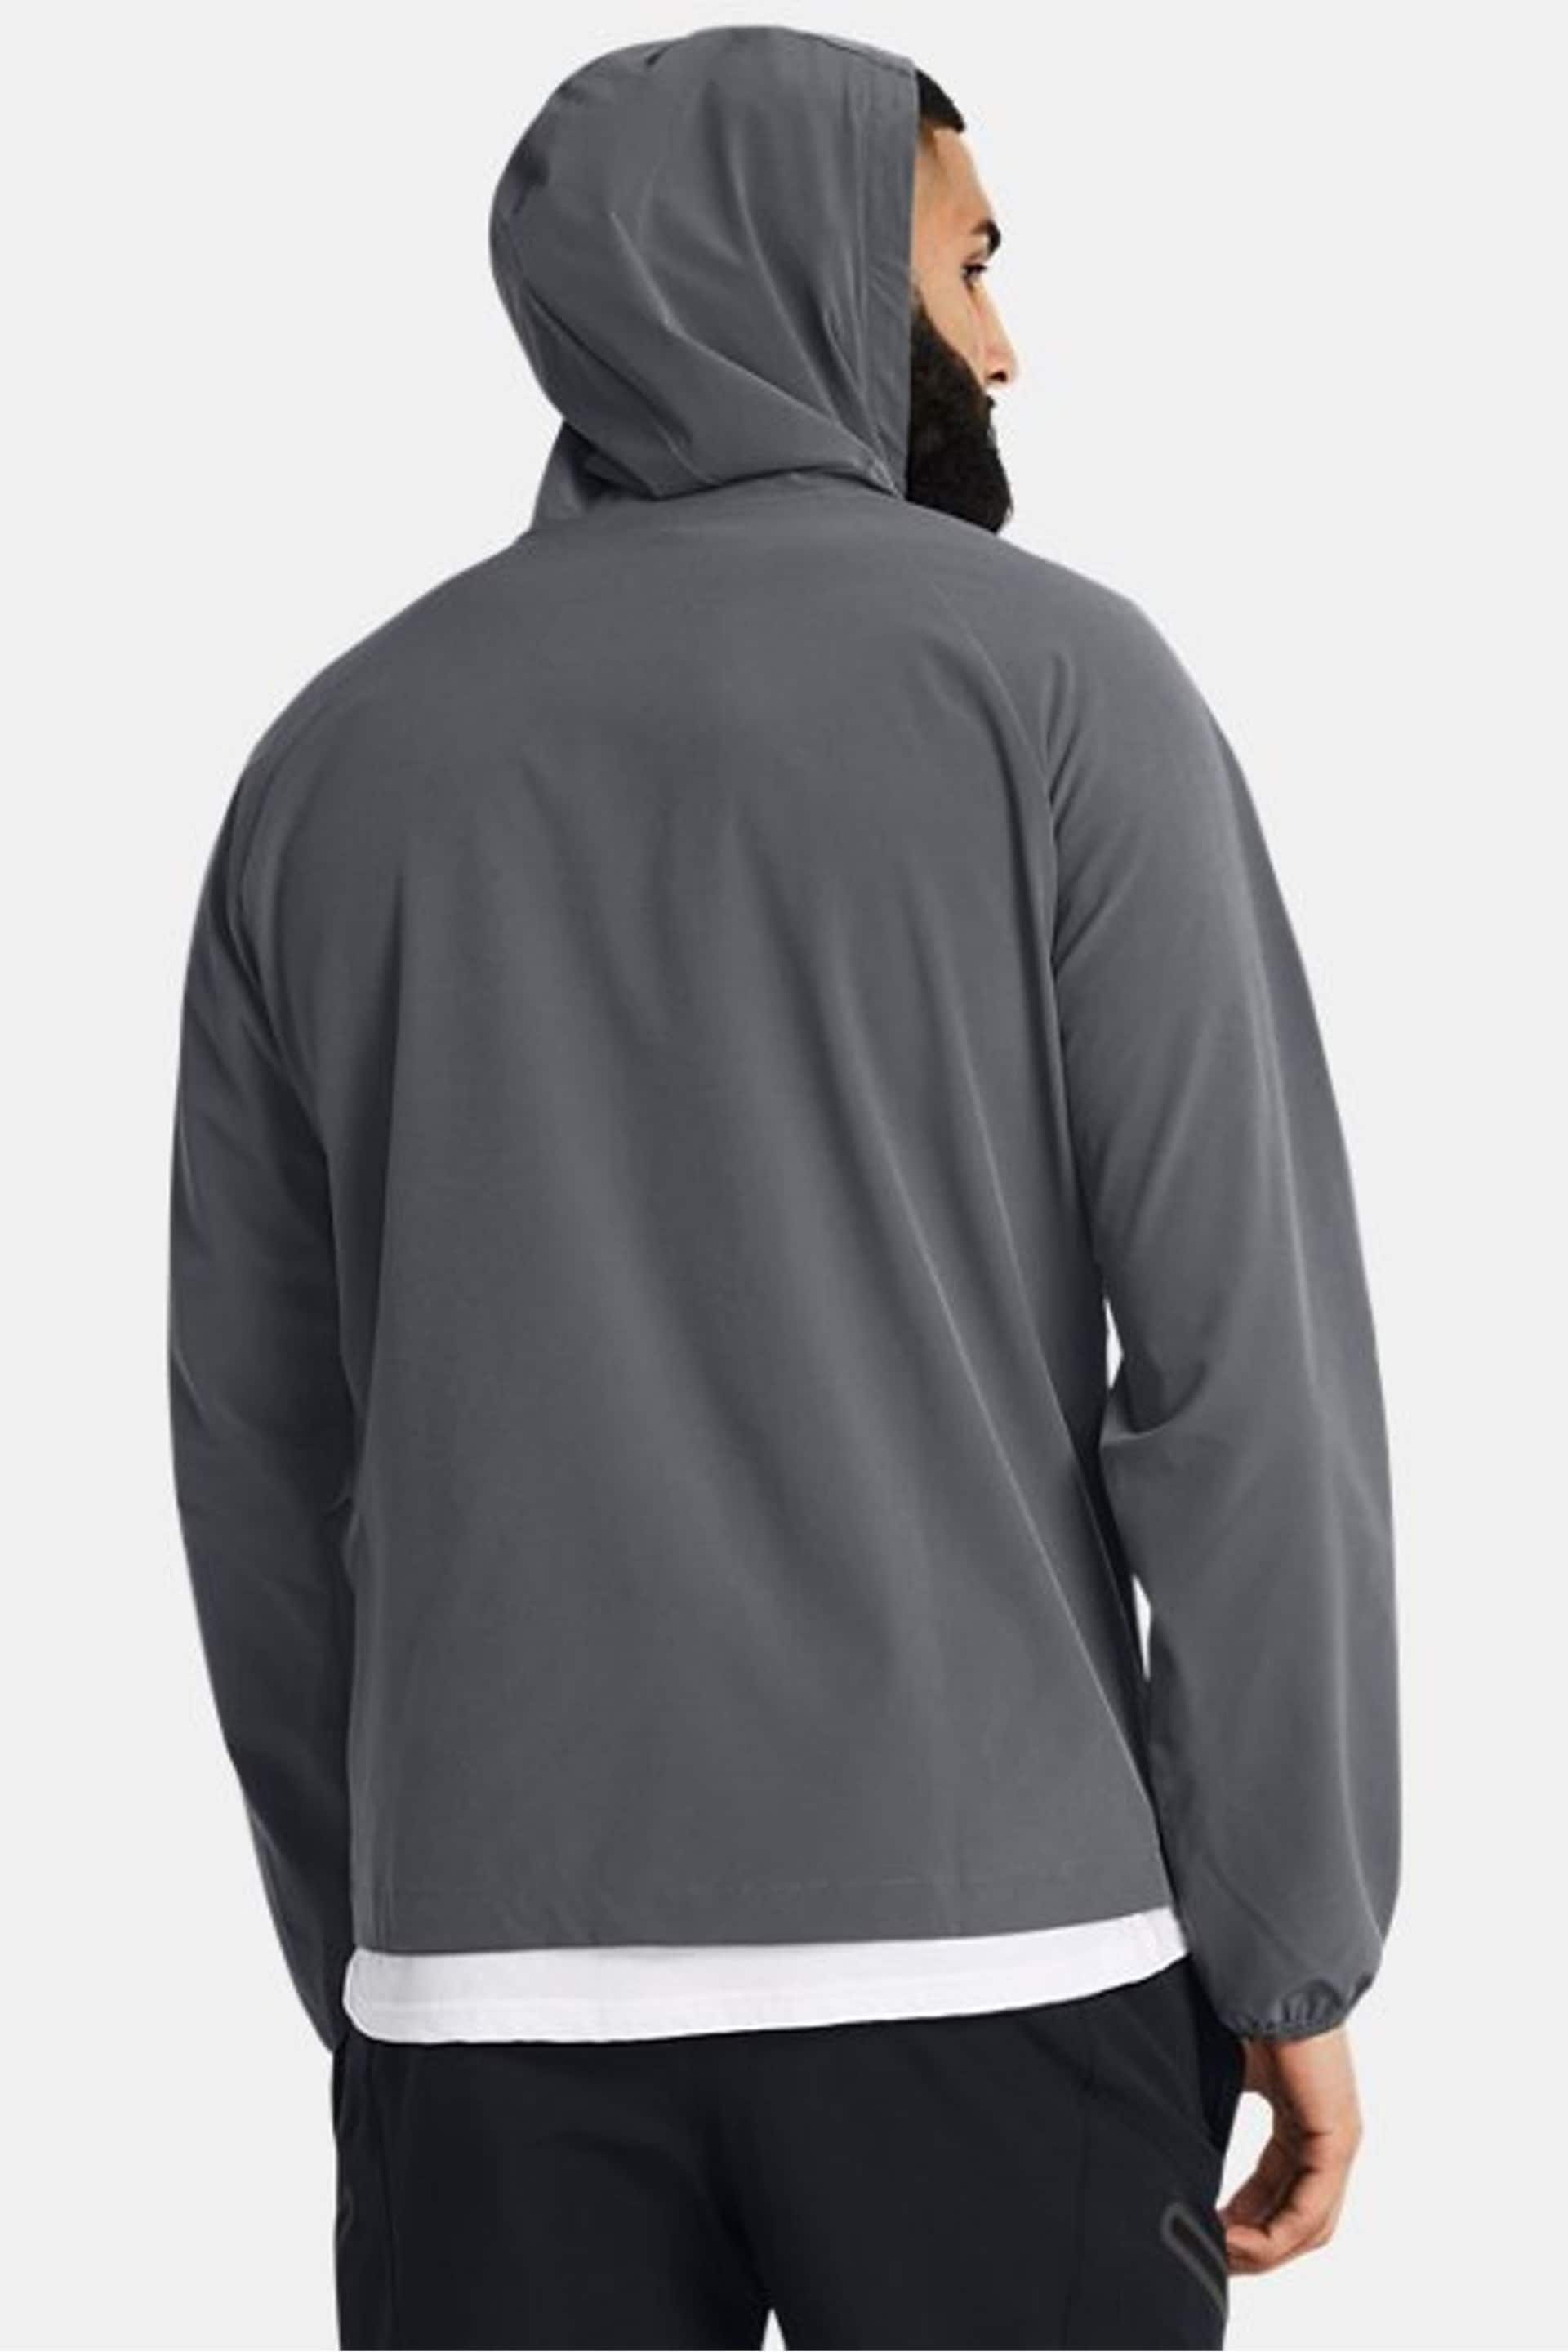 Under Armour Grey Stretch Woven Windbreaker - Image 2 of 6